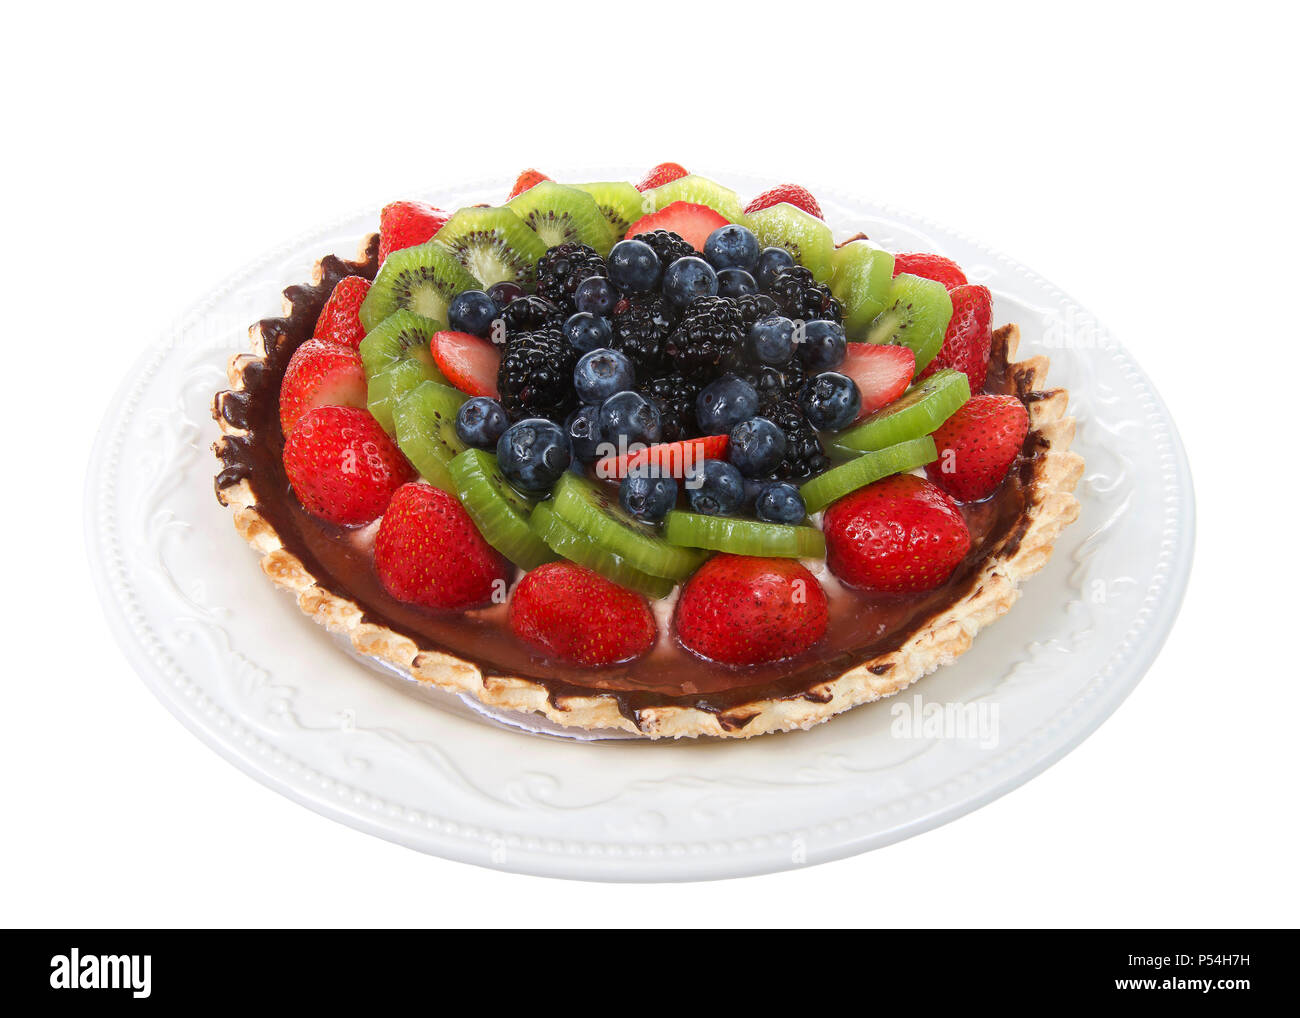 Fresh fruit tart on a pastry crust coated with chocolate on a white plate isolated on white background. Focus stacked for deeper depth of field. Stock Photo